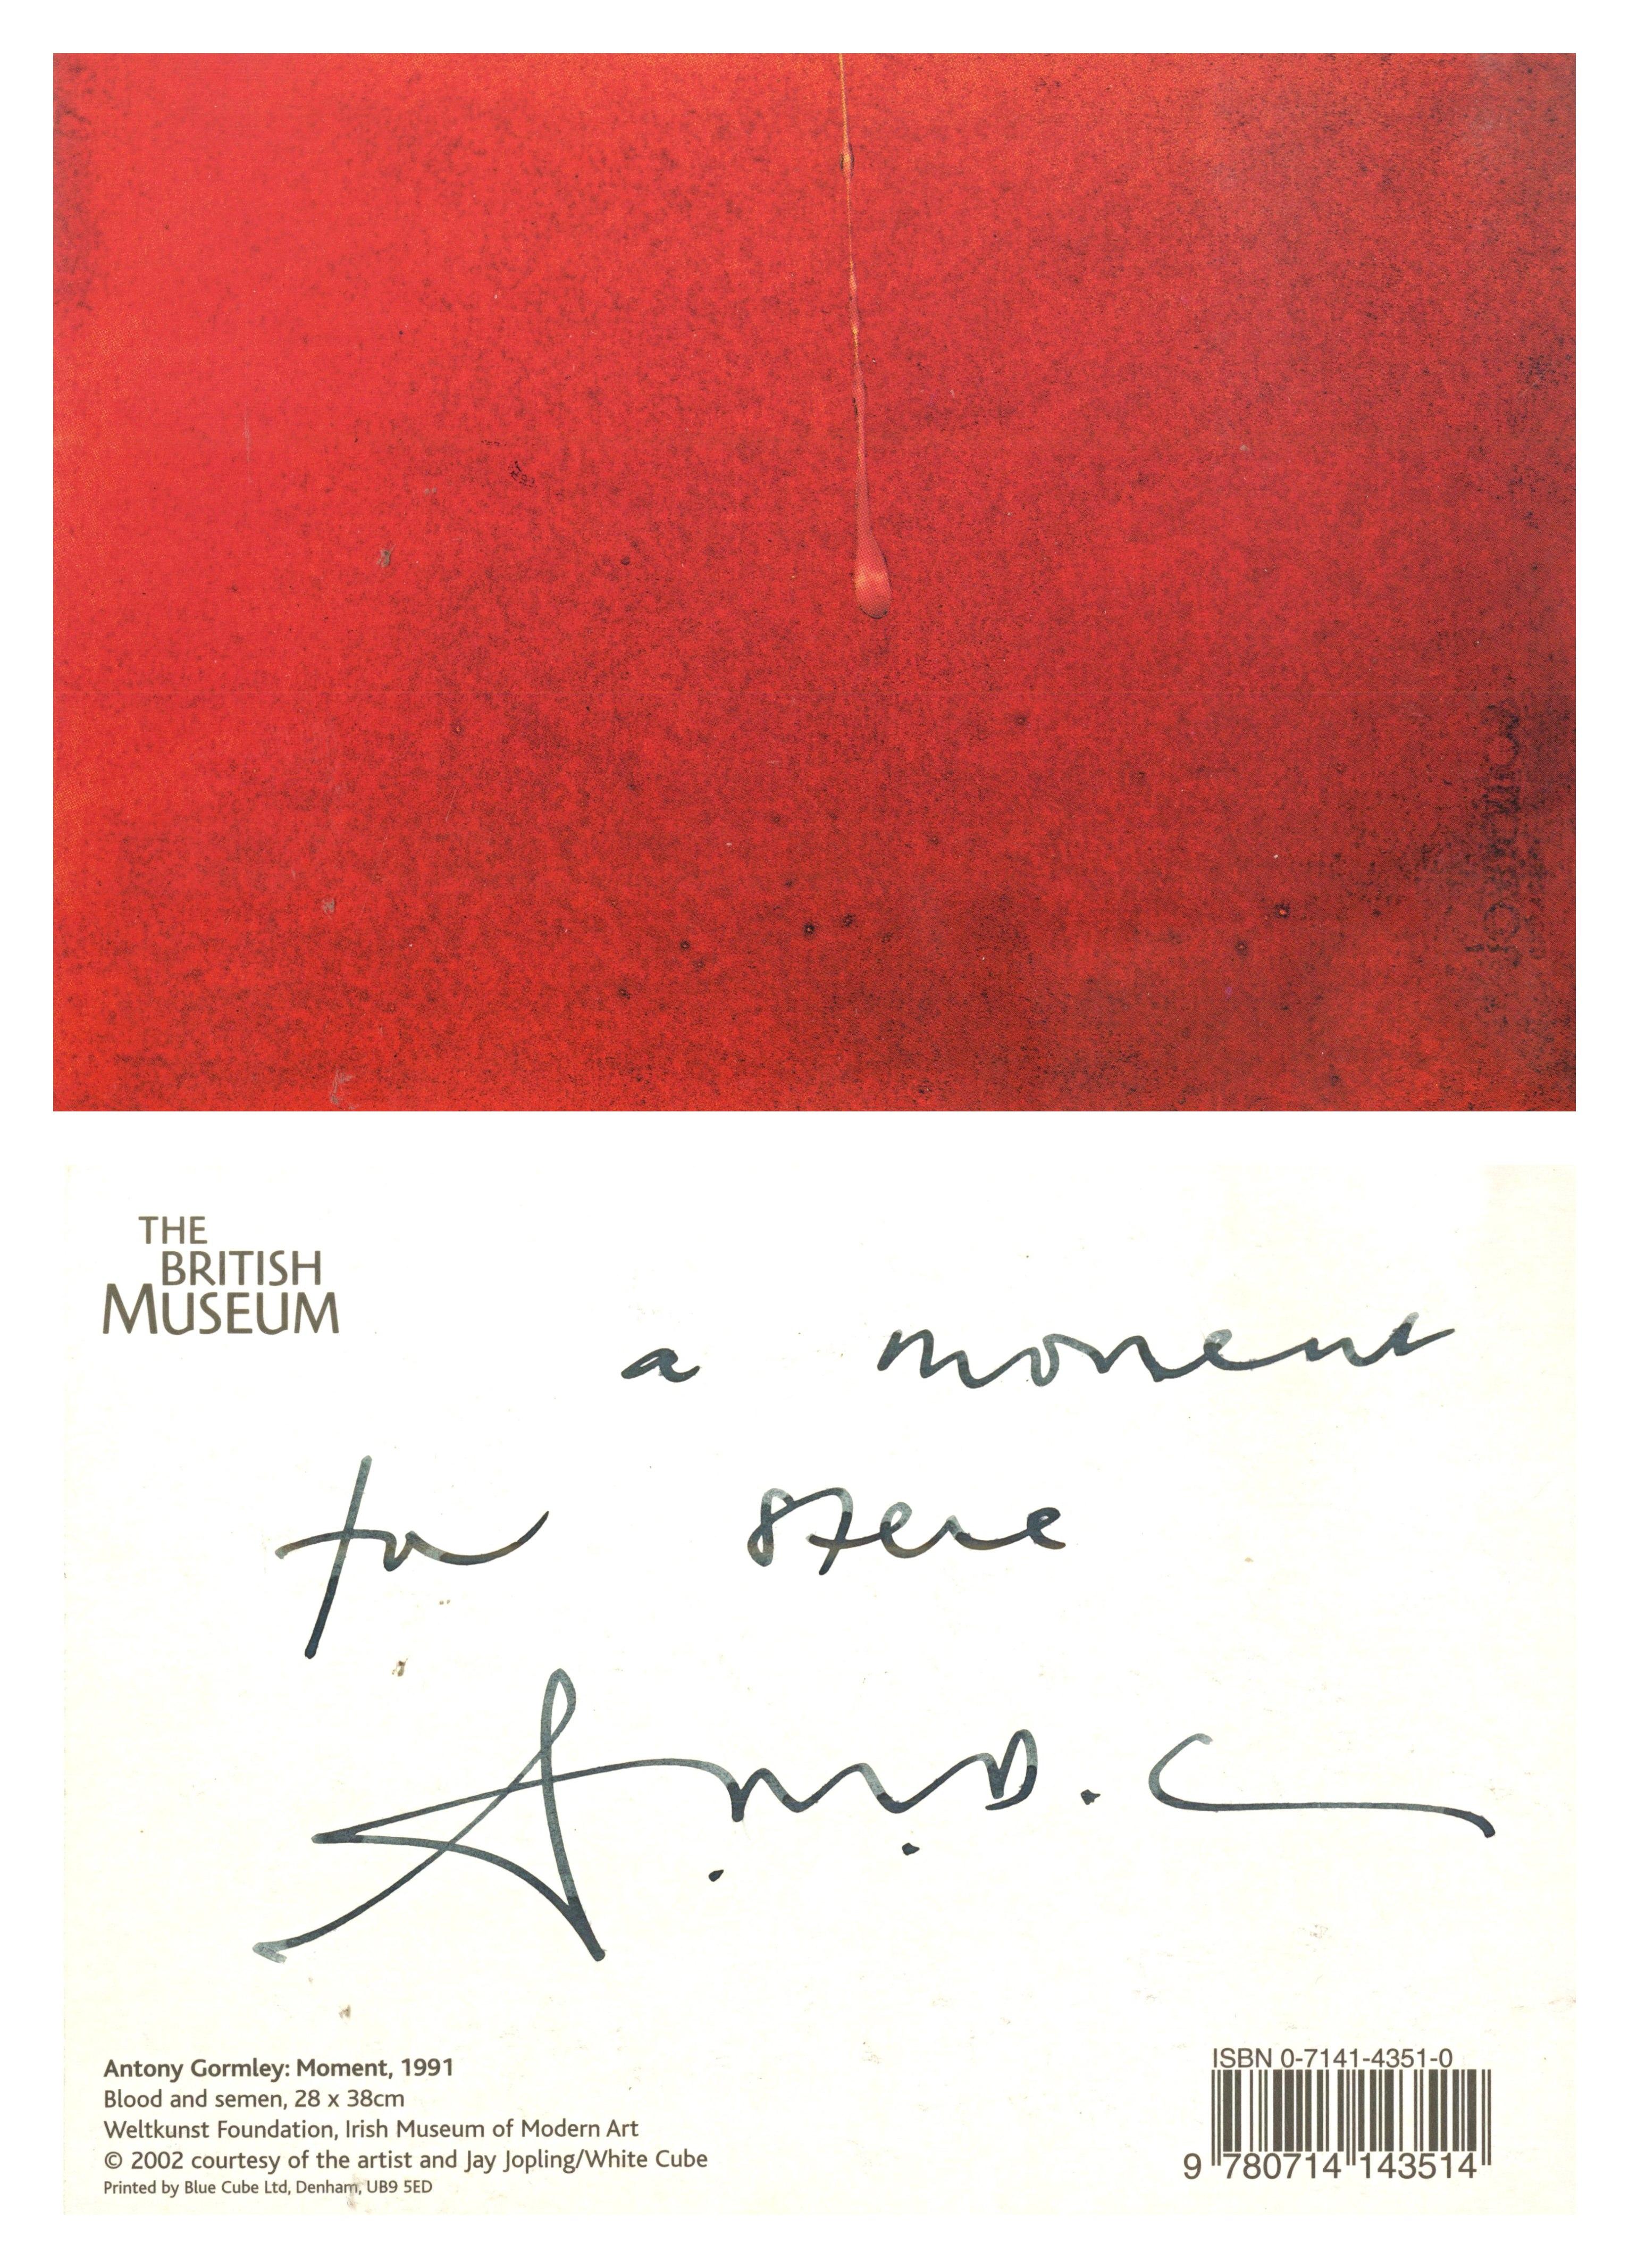 A Moment for Steve (Hand Signed and Inscribed postcard) - Abstract Art by Antony Gormley